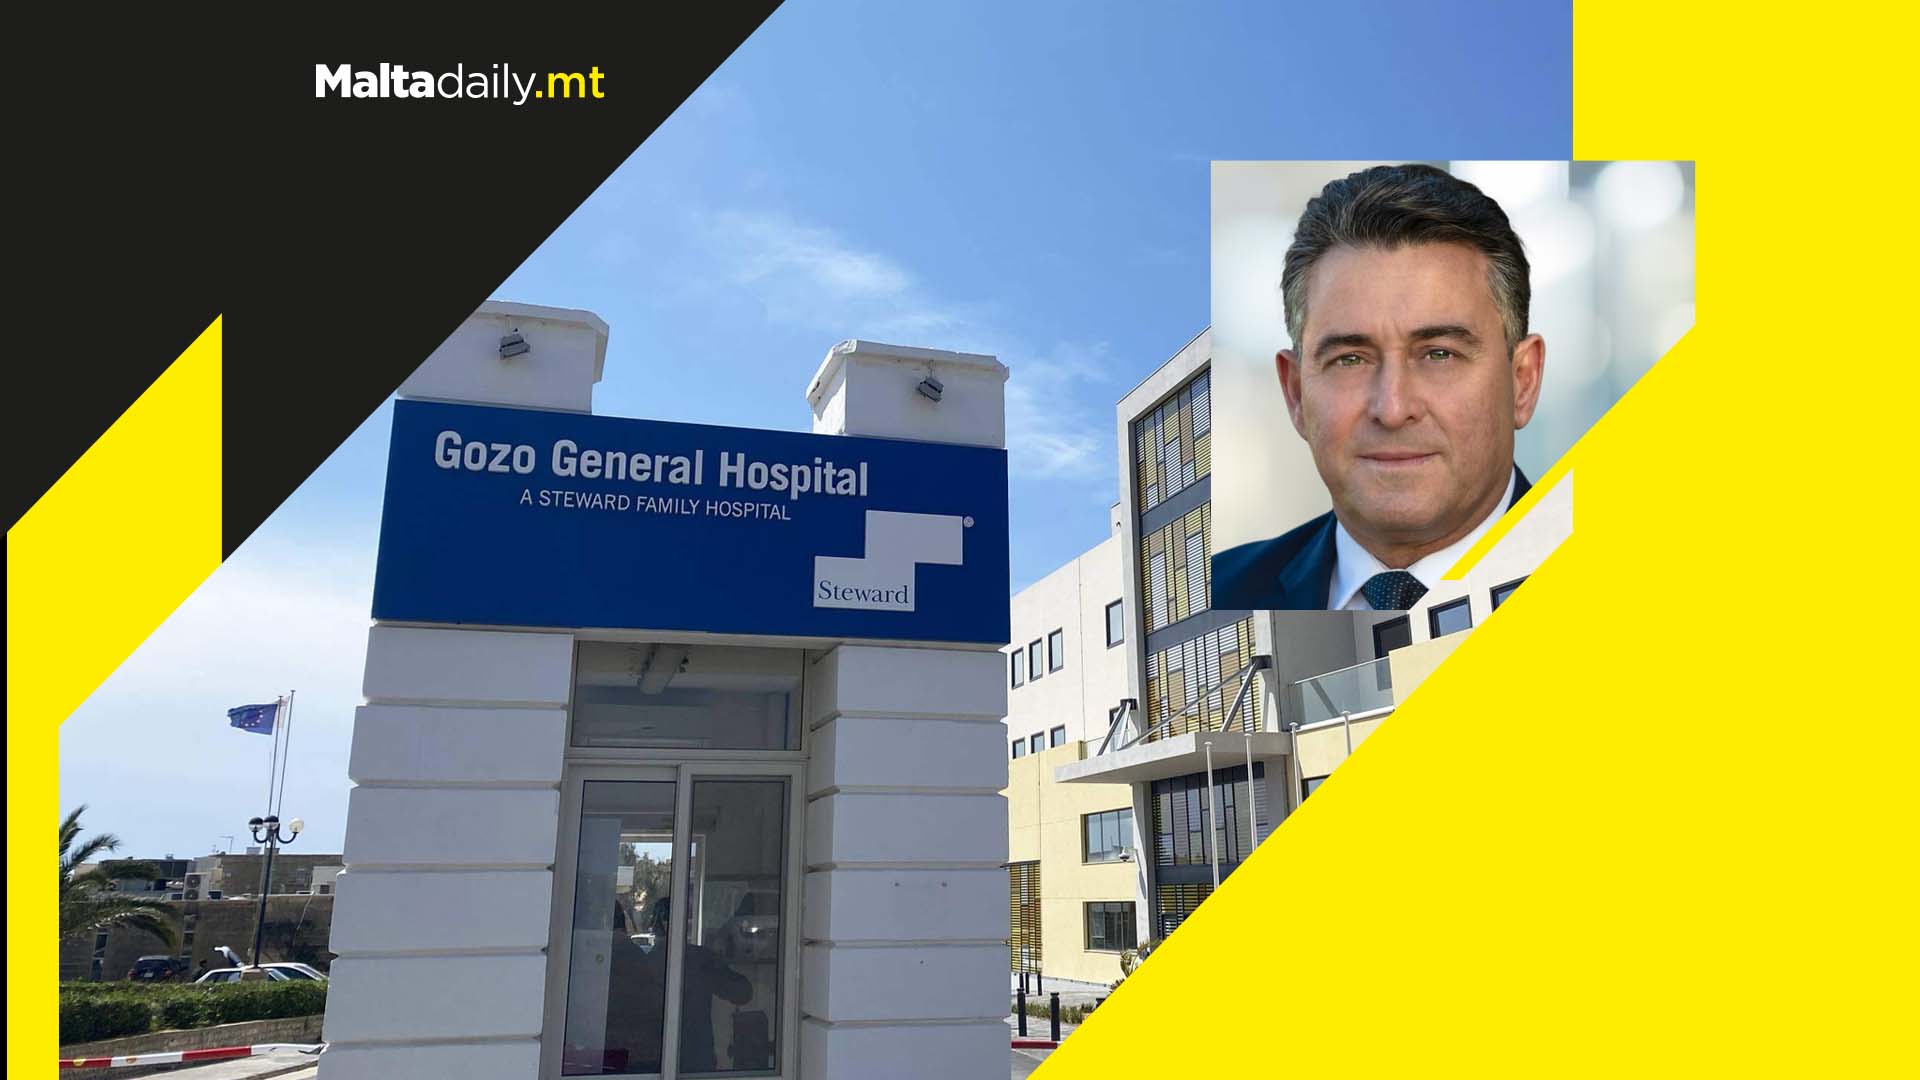 New hospital with 400 beds in Gozo pledged by Bernard Grech